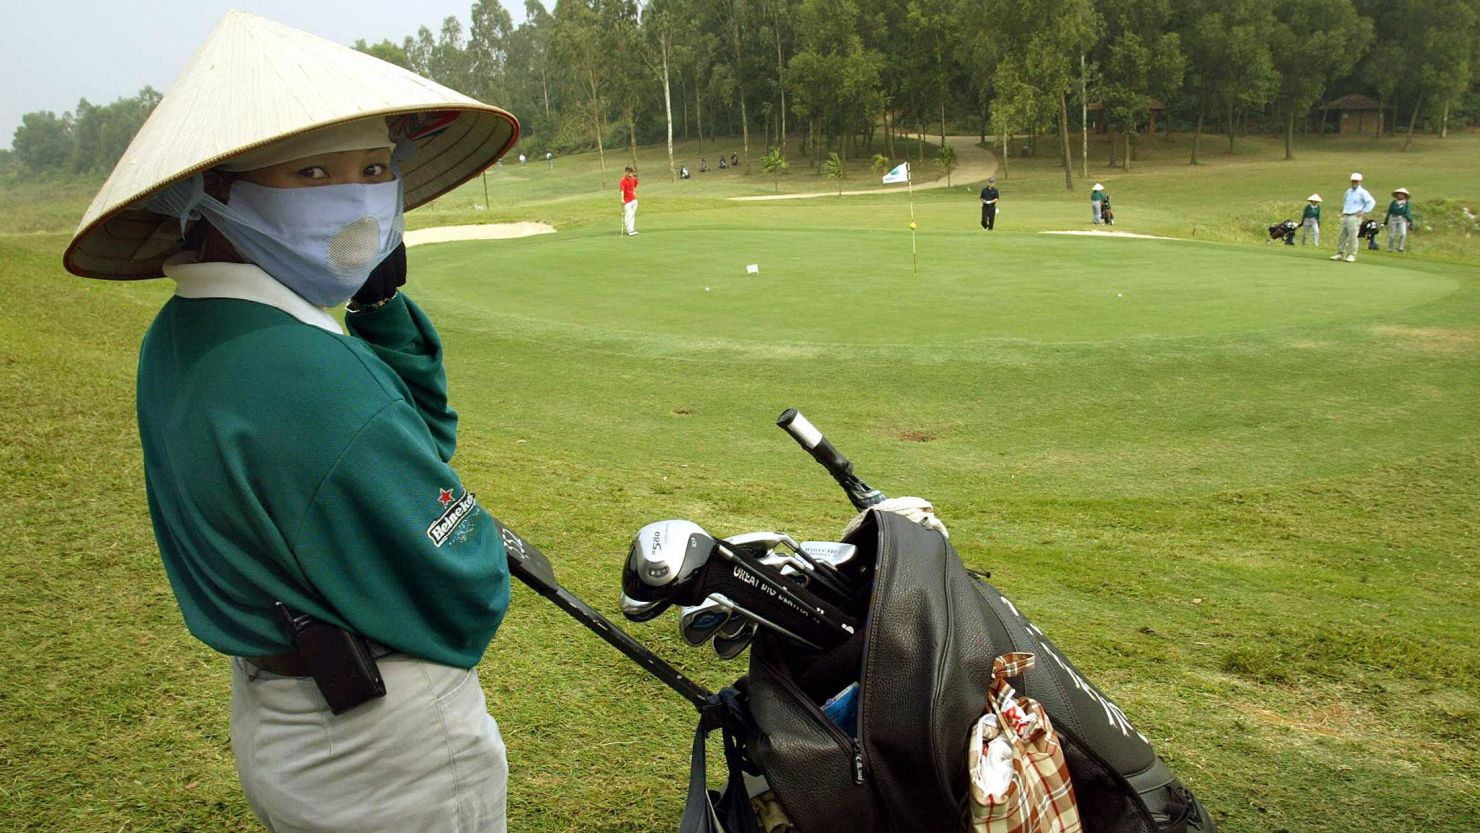 Senior officials have been banned from playing golf amid fears they are spending too much time on the golf course.